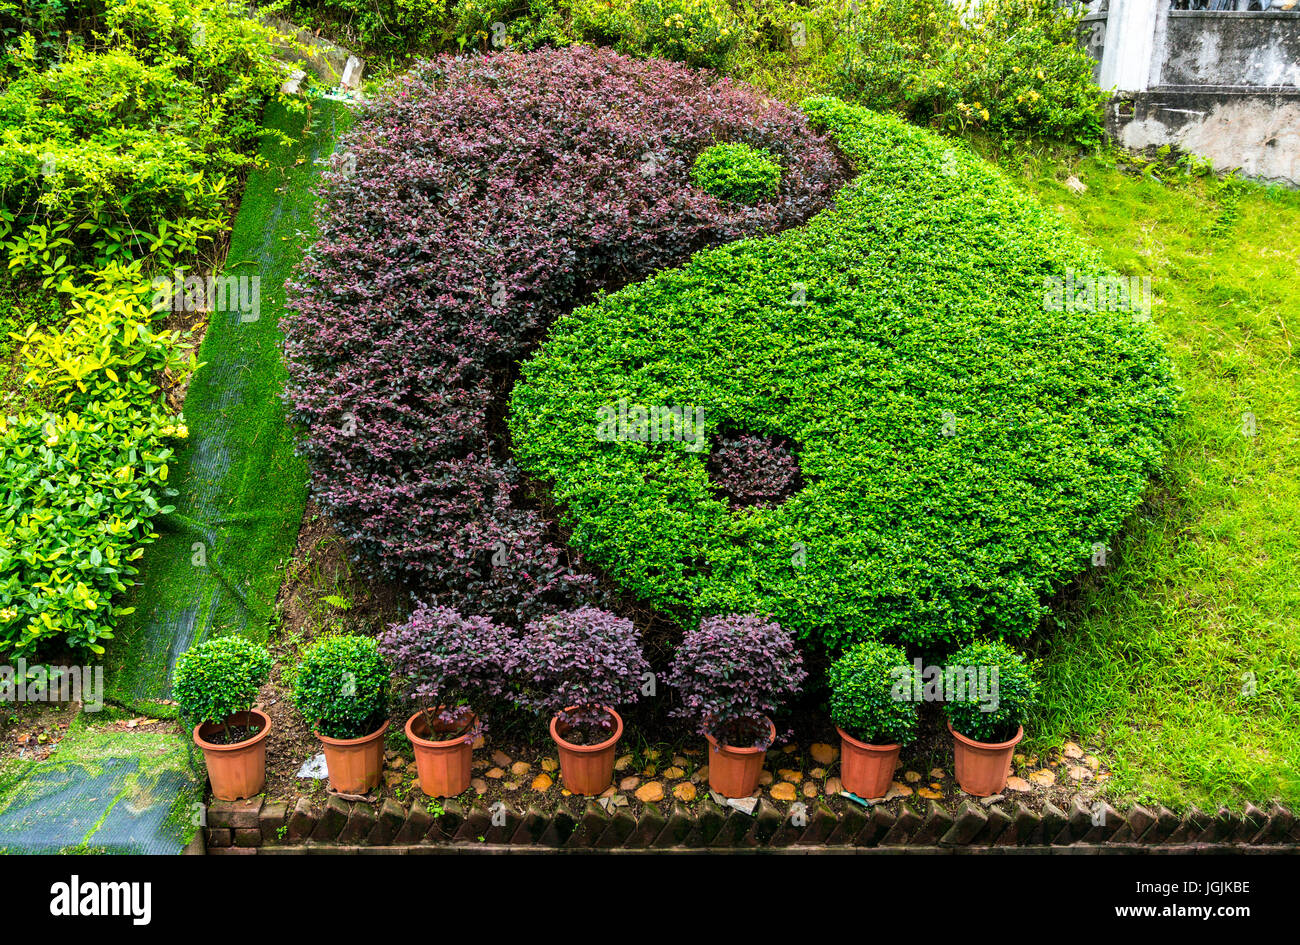 Yin and yang pattern in garden, landscaped bushes and shrubs Stock Photo